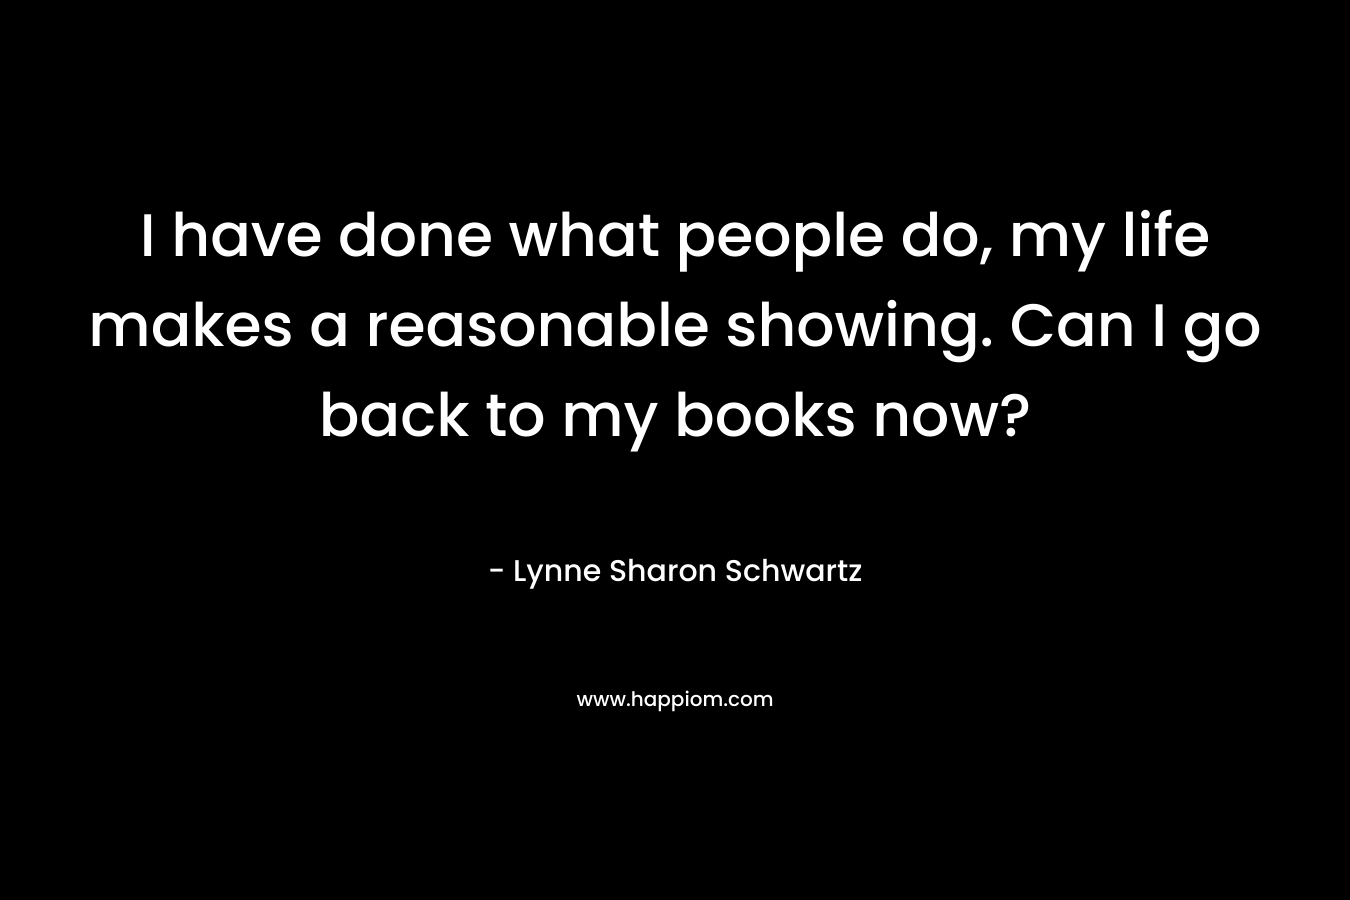 I have done what people do, my life makes a reasonable showing. Can I go back to my books now? – Lynne Sharon Schwartz